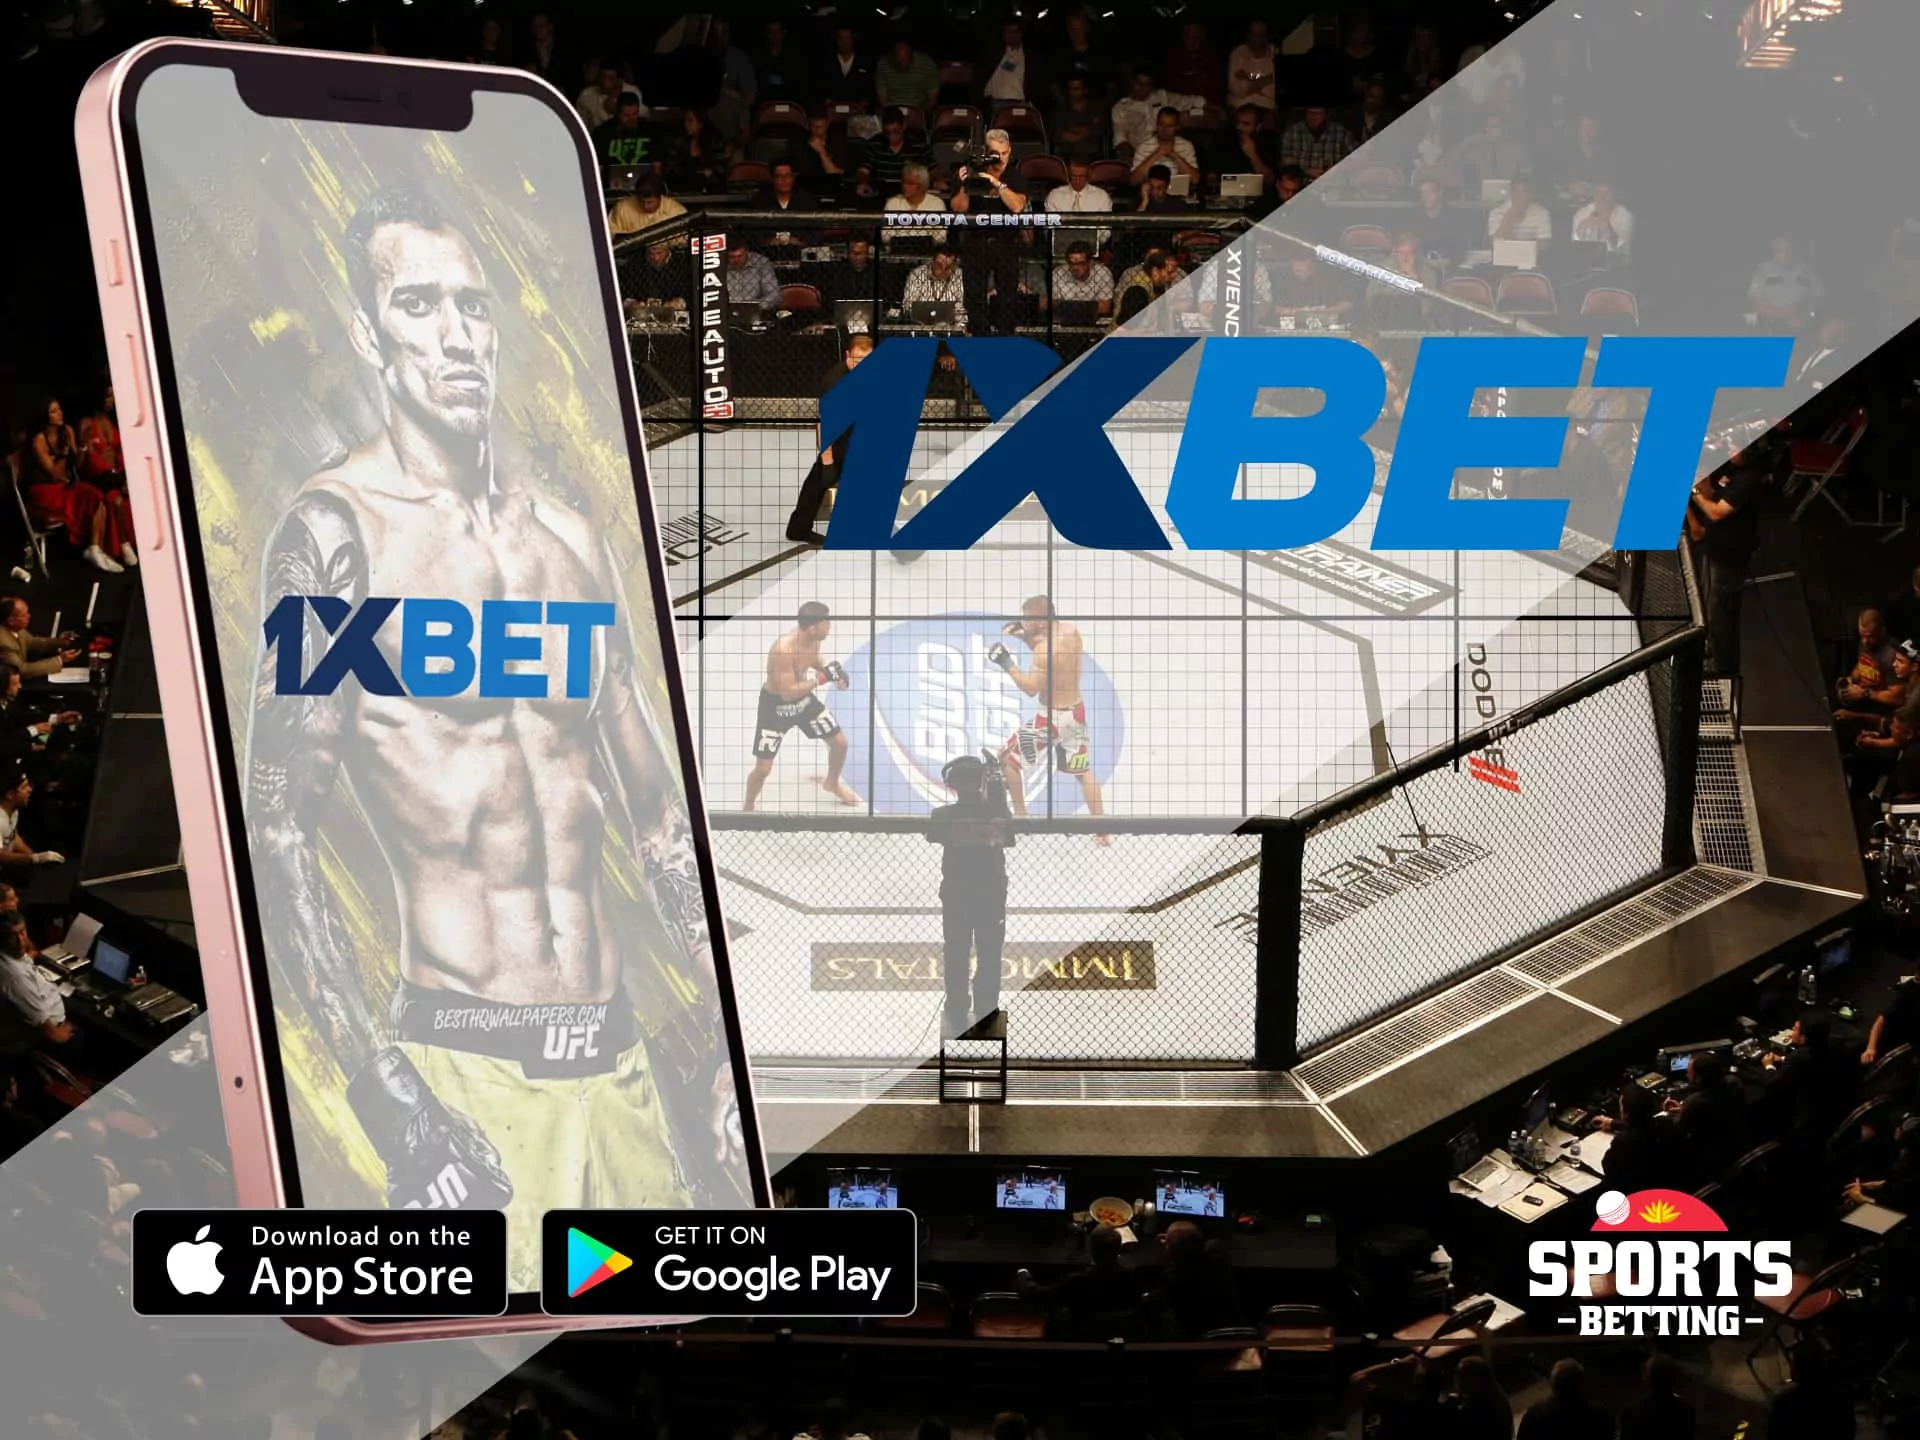 1xBet UFC betting app with a lot of promotions.